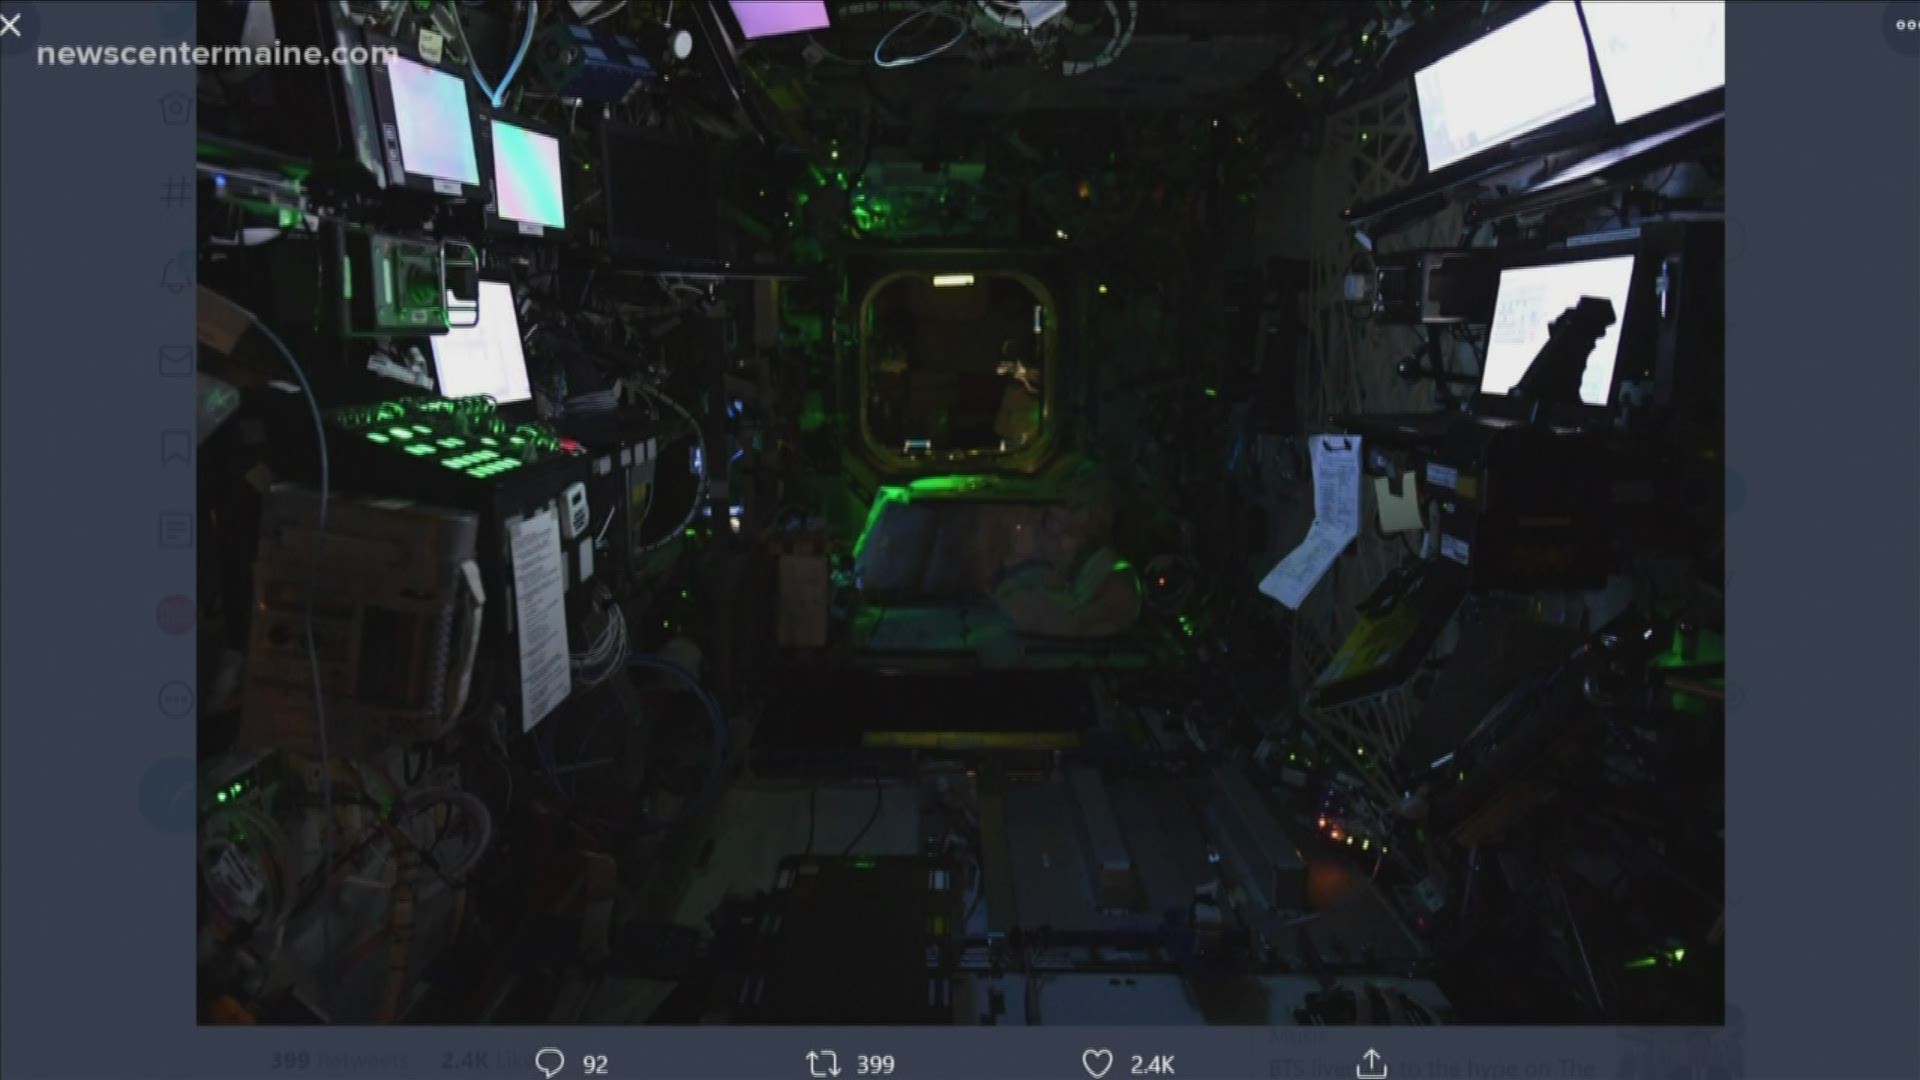 Caribou native Dr. Jessica Meir tweeted a photo of what bedtime looks like on the International Space Station.